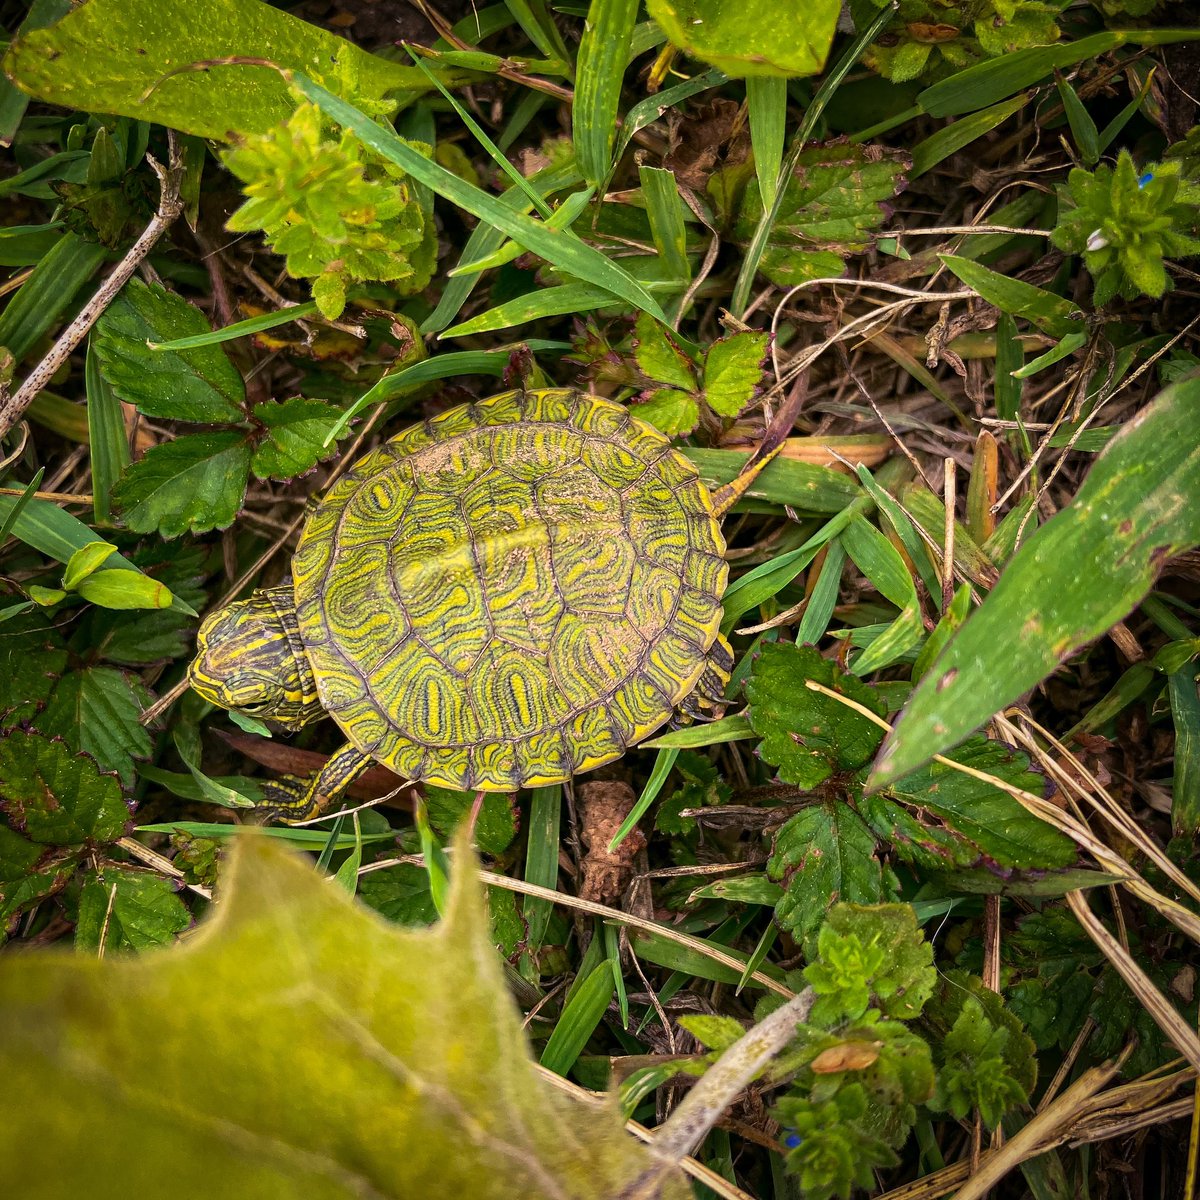 Met a friend on my afternoon walk. He is safe off the side of the road away from passing cars and pedestrians.
.
#babyturtle #kywildlife #gettingoutdoors #redearedslider #hatchlings #reptilesofinstagram #animalphotography